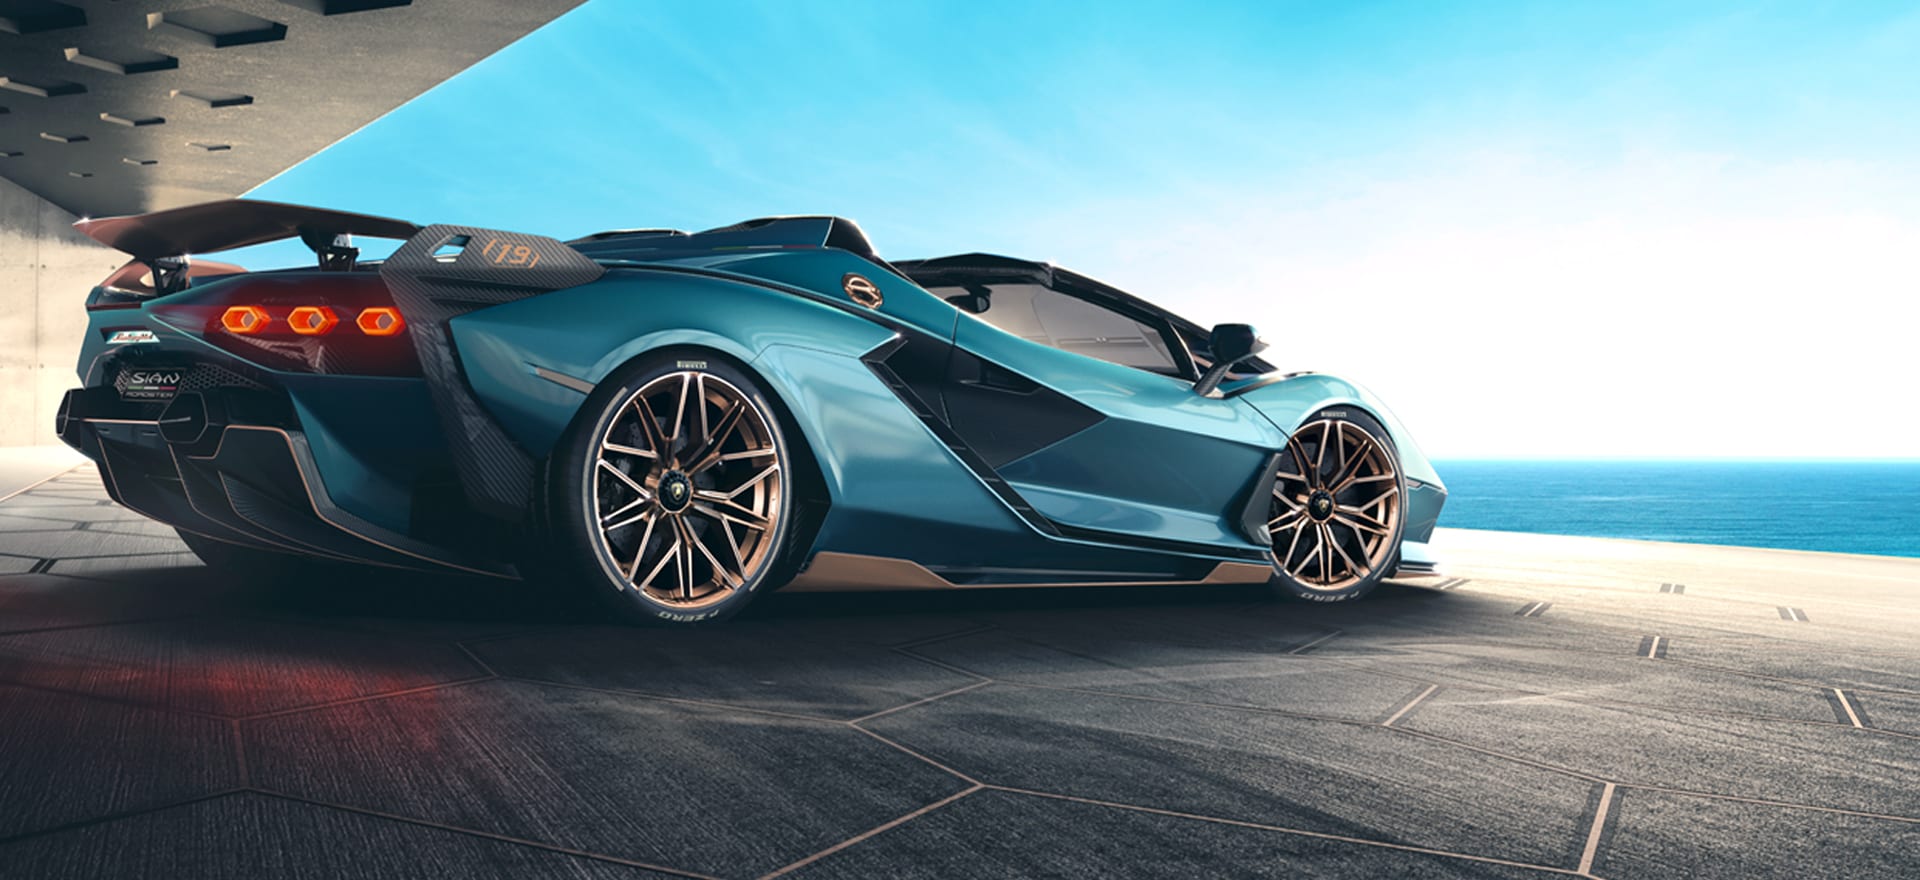 The V-12 Hybrid Sián Is the Most Powerful Lamborghini Ever